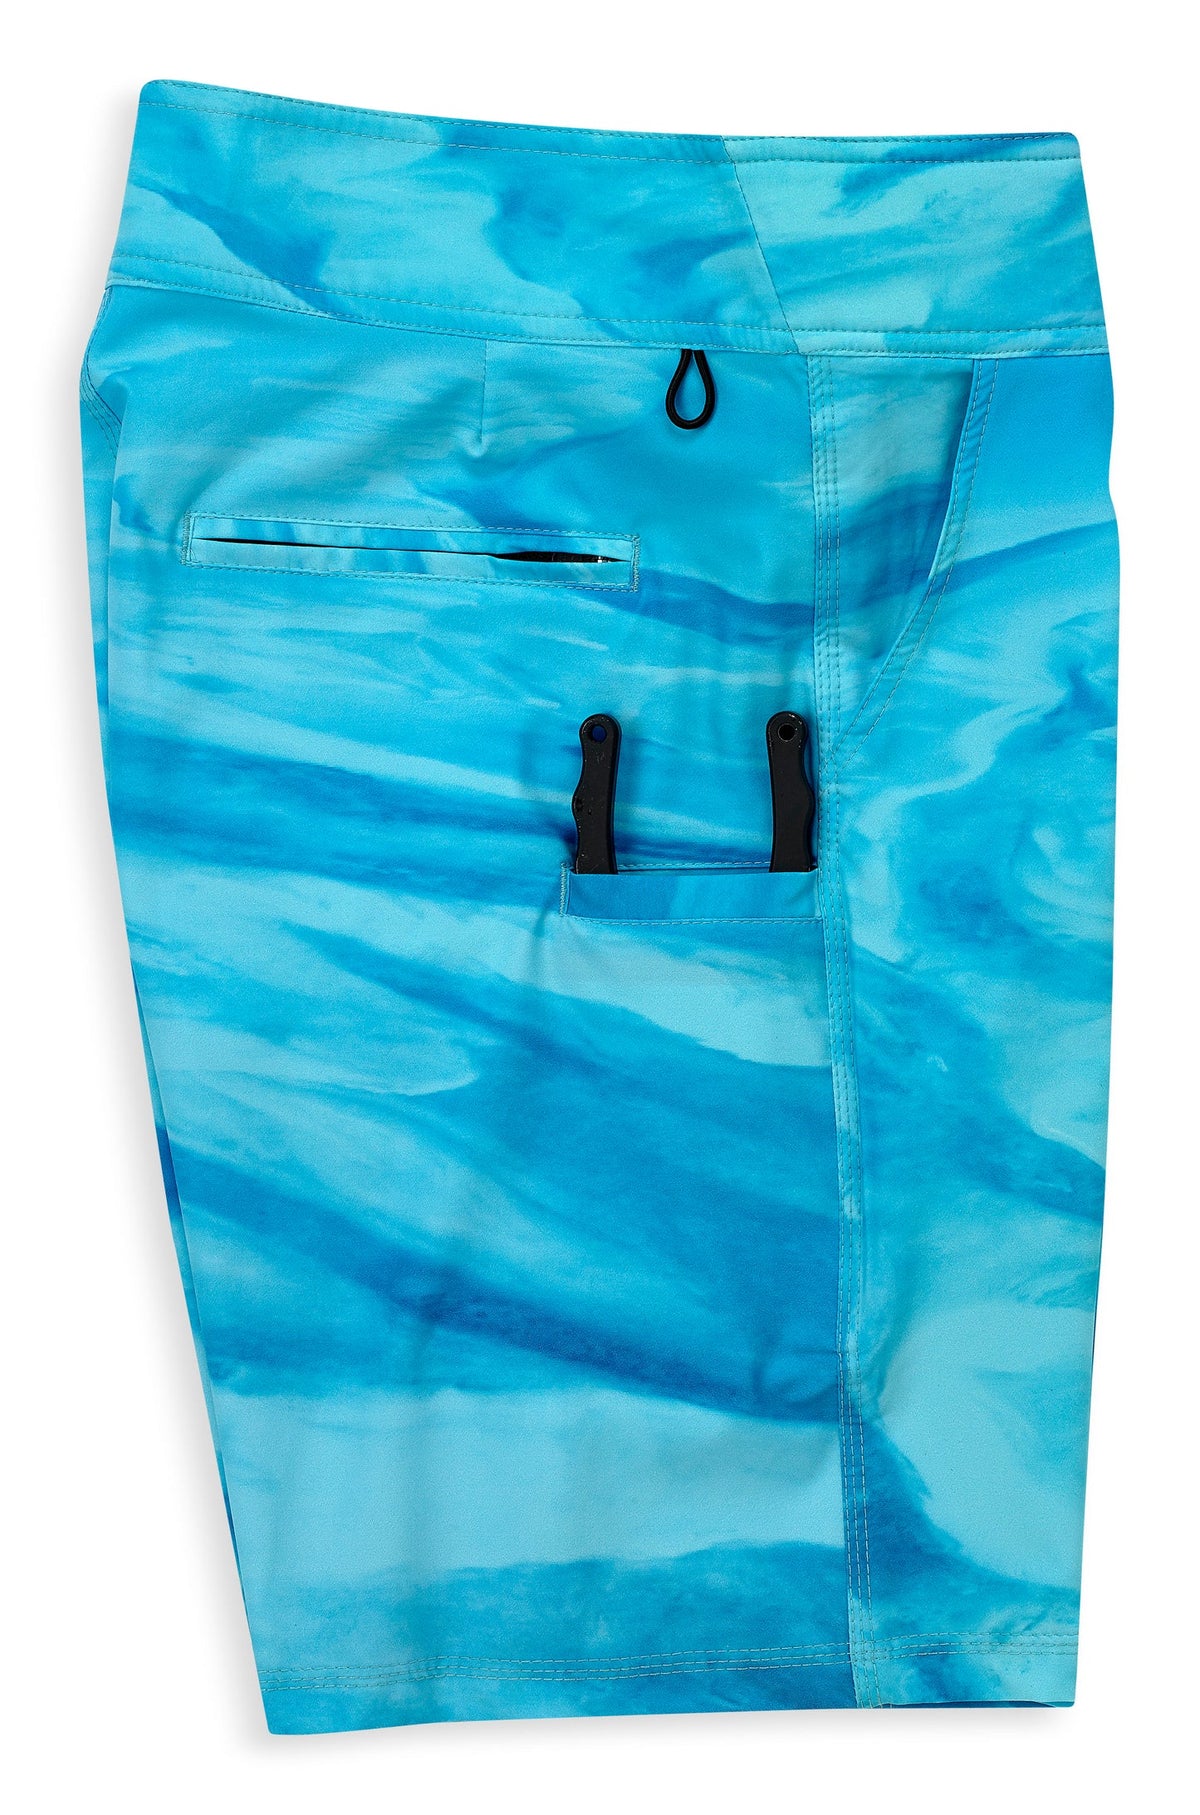 SCALES Bahamas Current First Mates Boardshorts